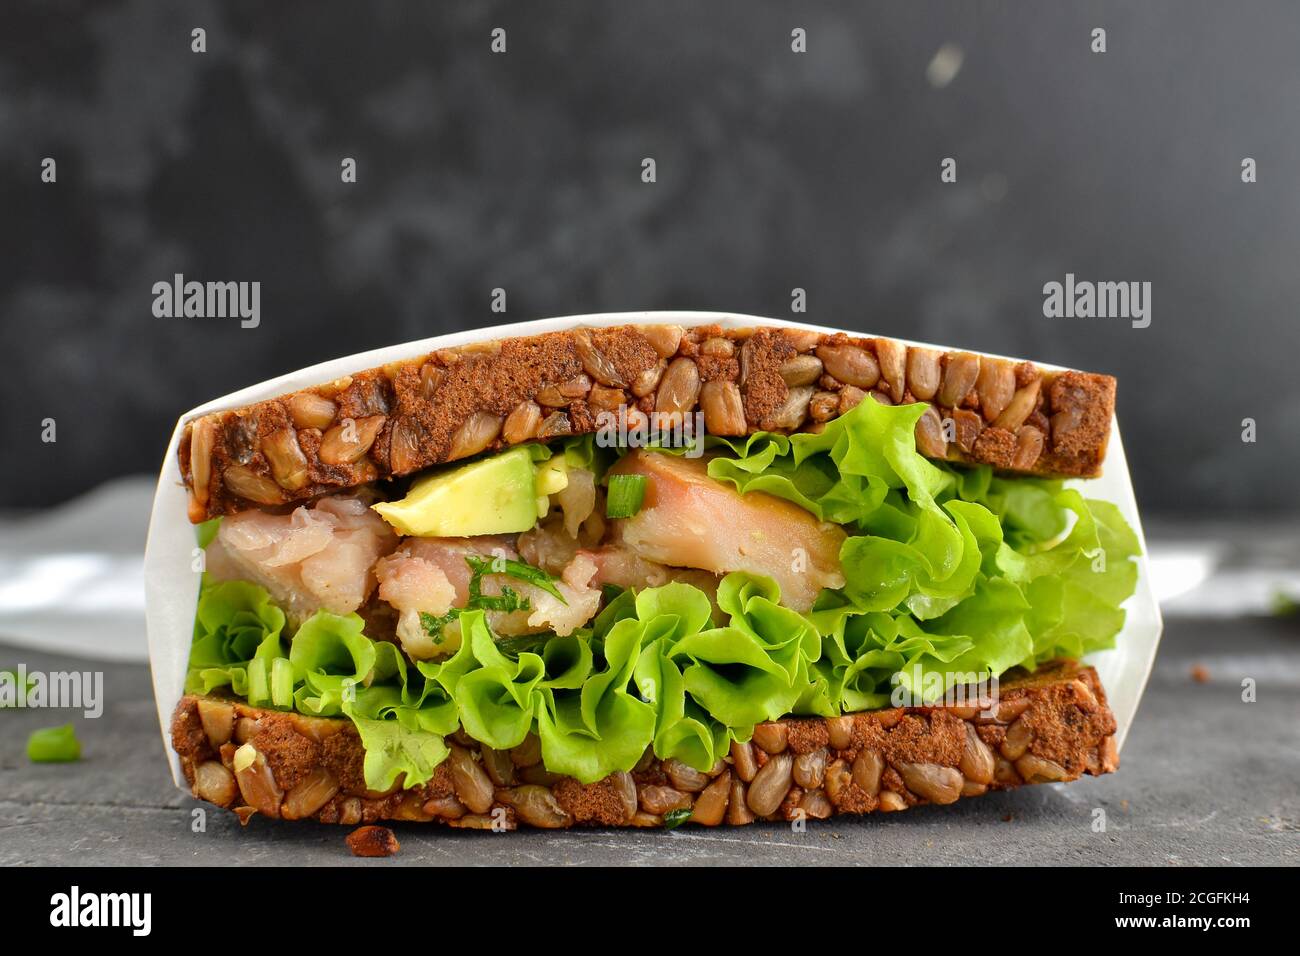 Dark bread sandwich with seeds. Sandwich with lettuce, avocado and fish. Healthy lunch or brunch. Dark background. Close-up. Stock Photo